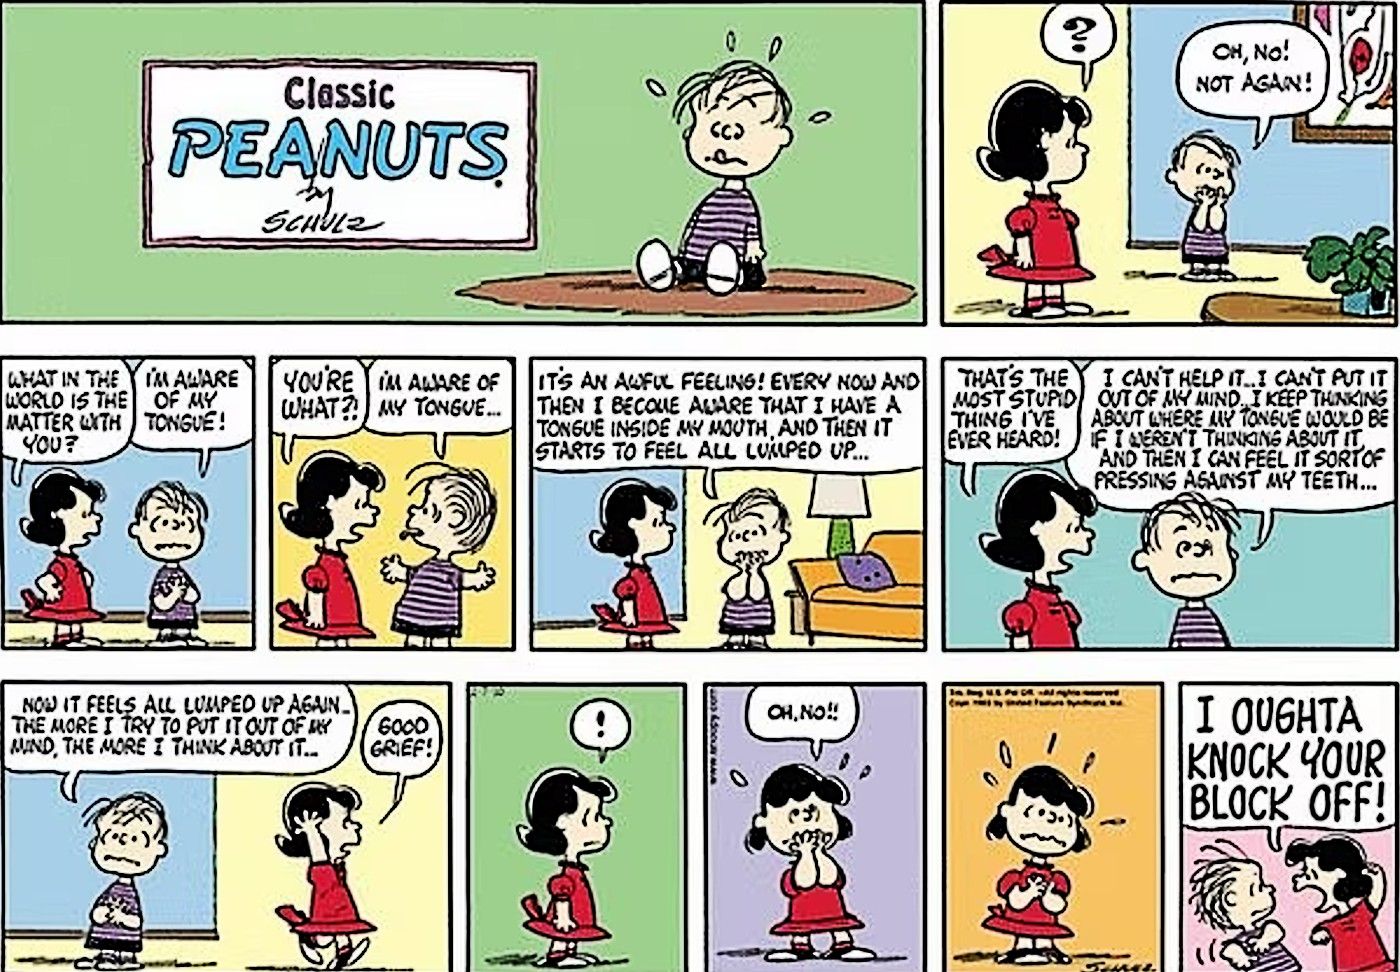 Peanuts, Linus Van Pelt is aware of his tongue & makes Lucy aware of hers